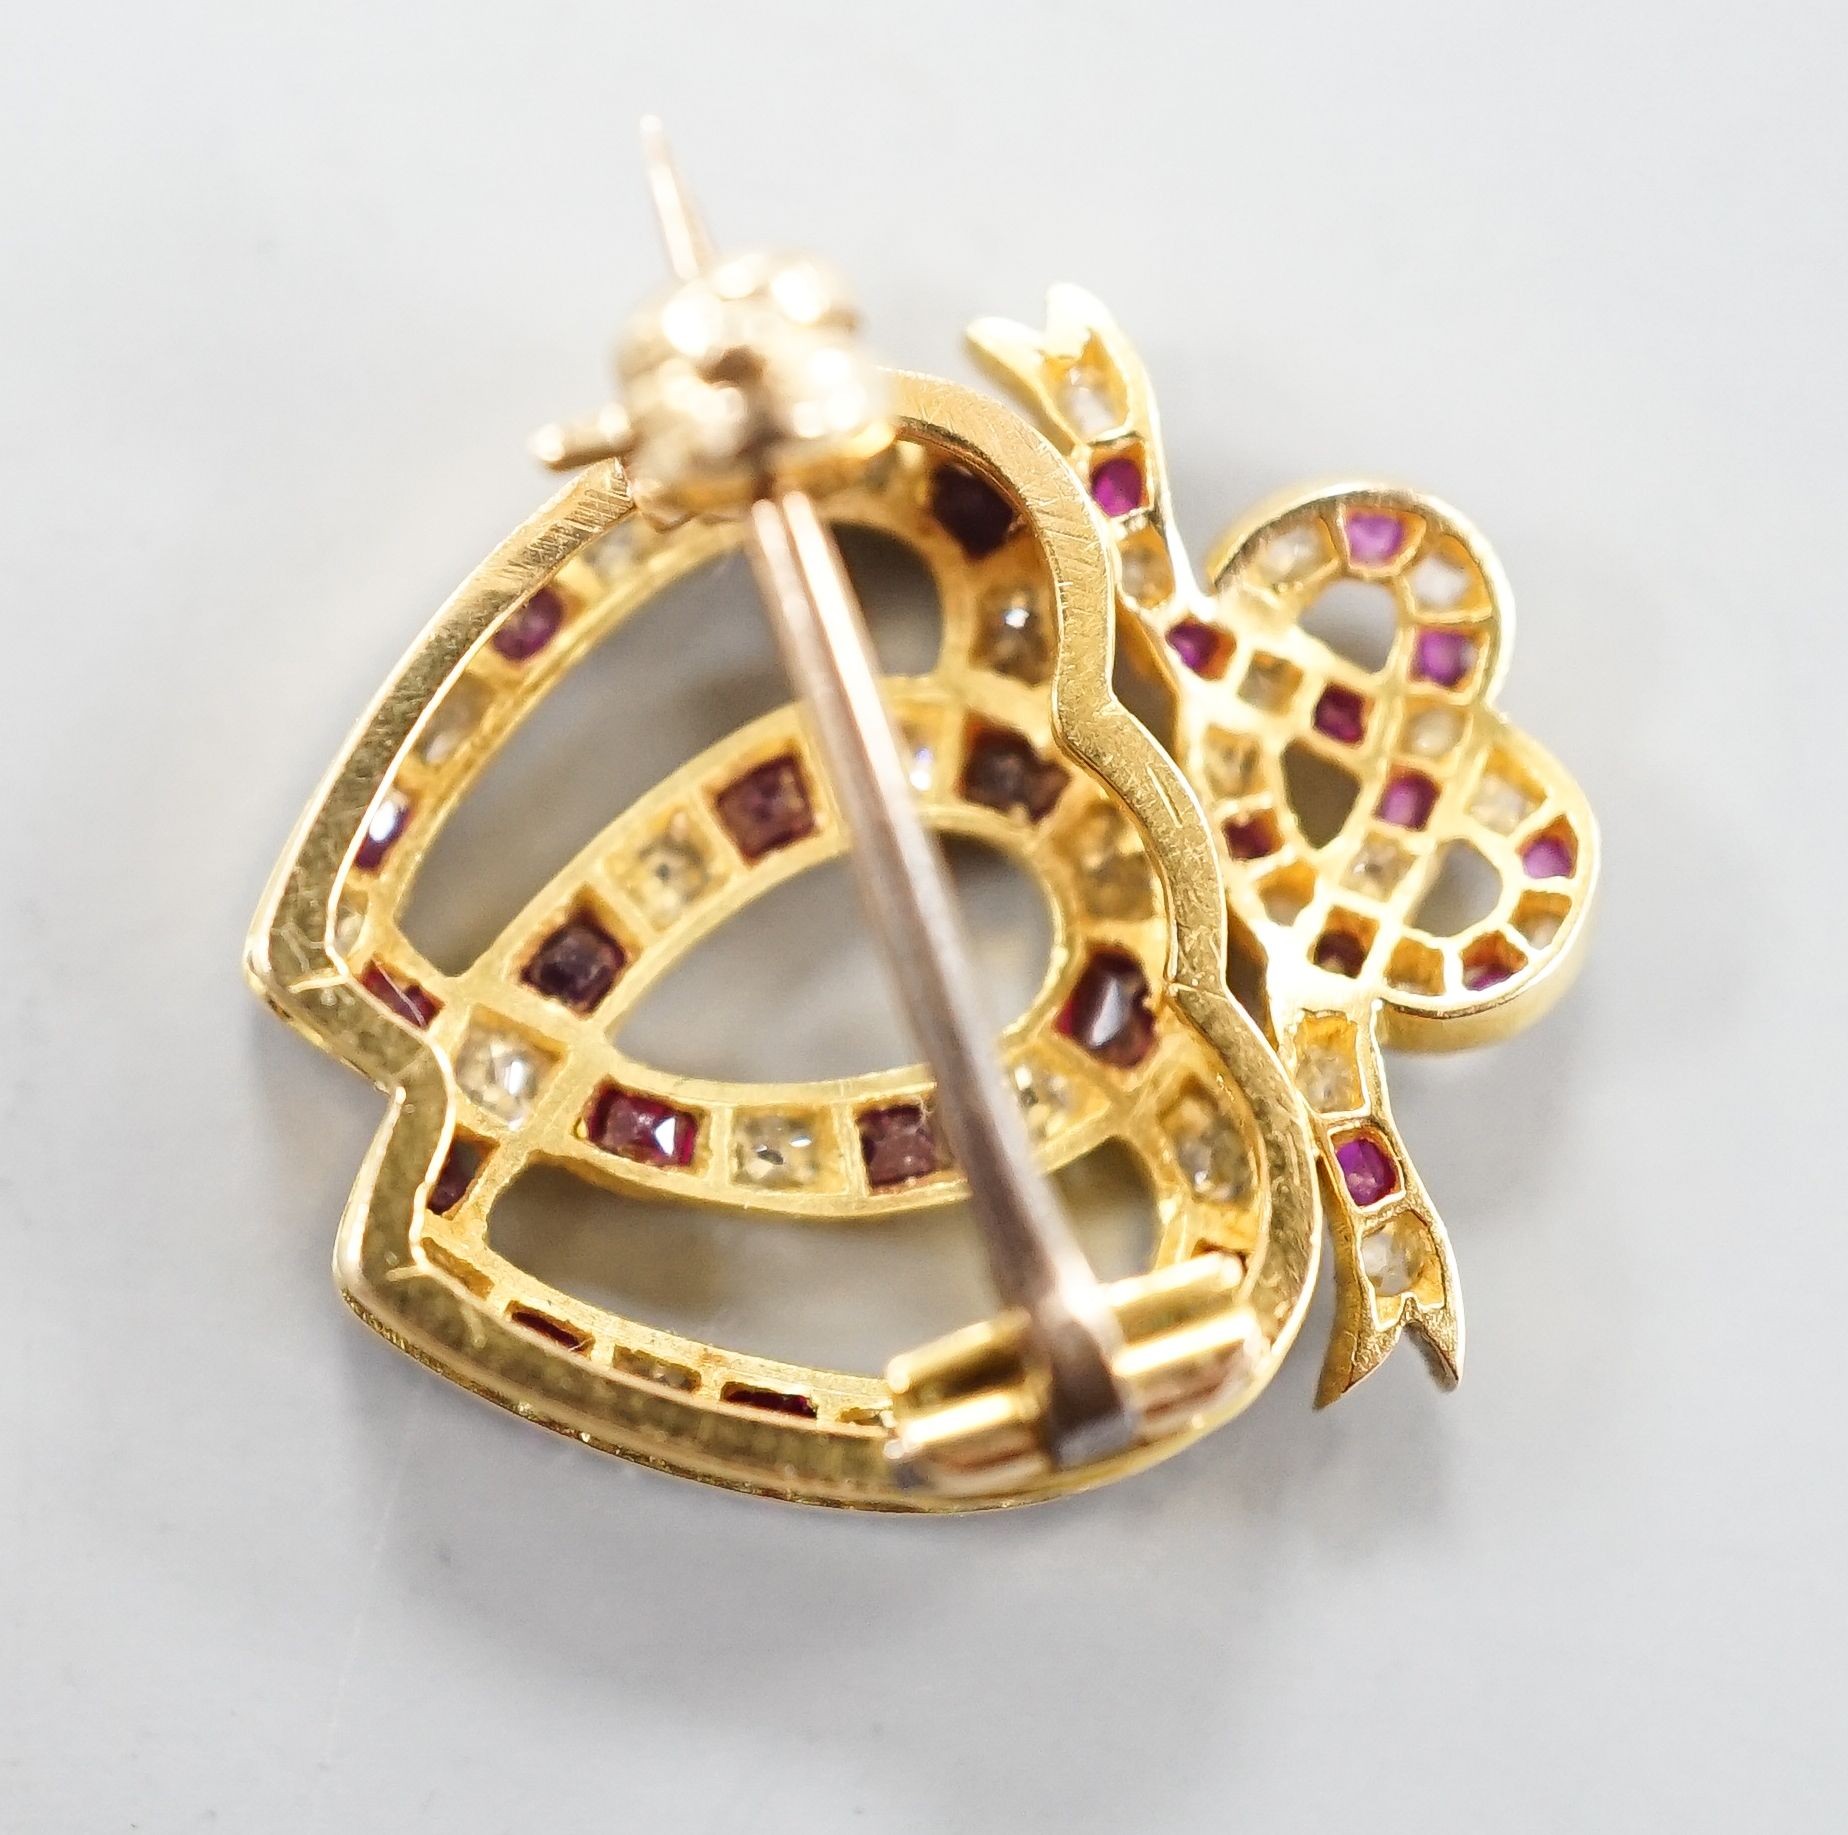 An early 20th century yellow metal, ruby and diamond set twin hearts brooch, with ribbon bow crest, 18mm, gross 2.4 grams.